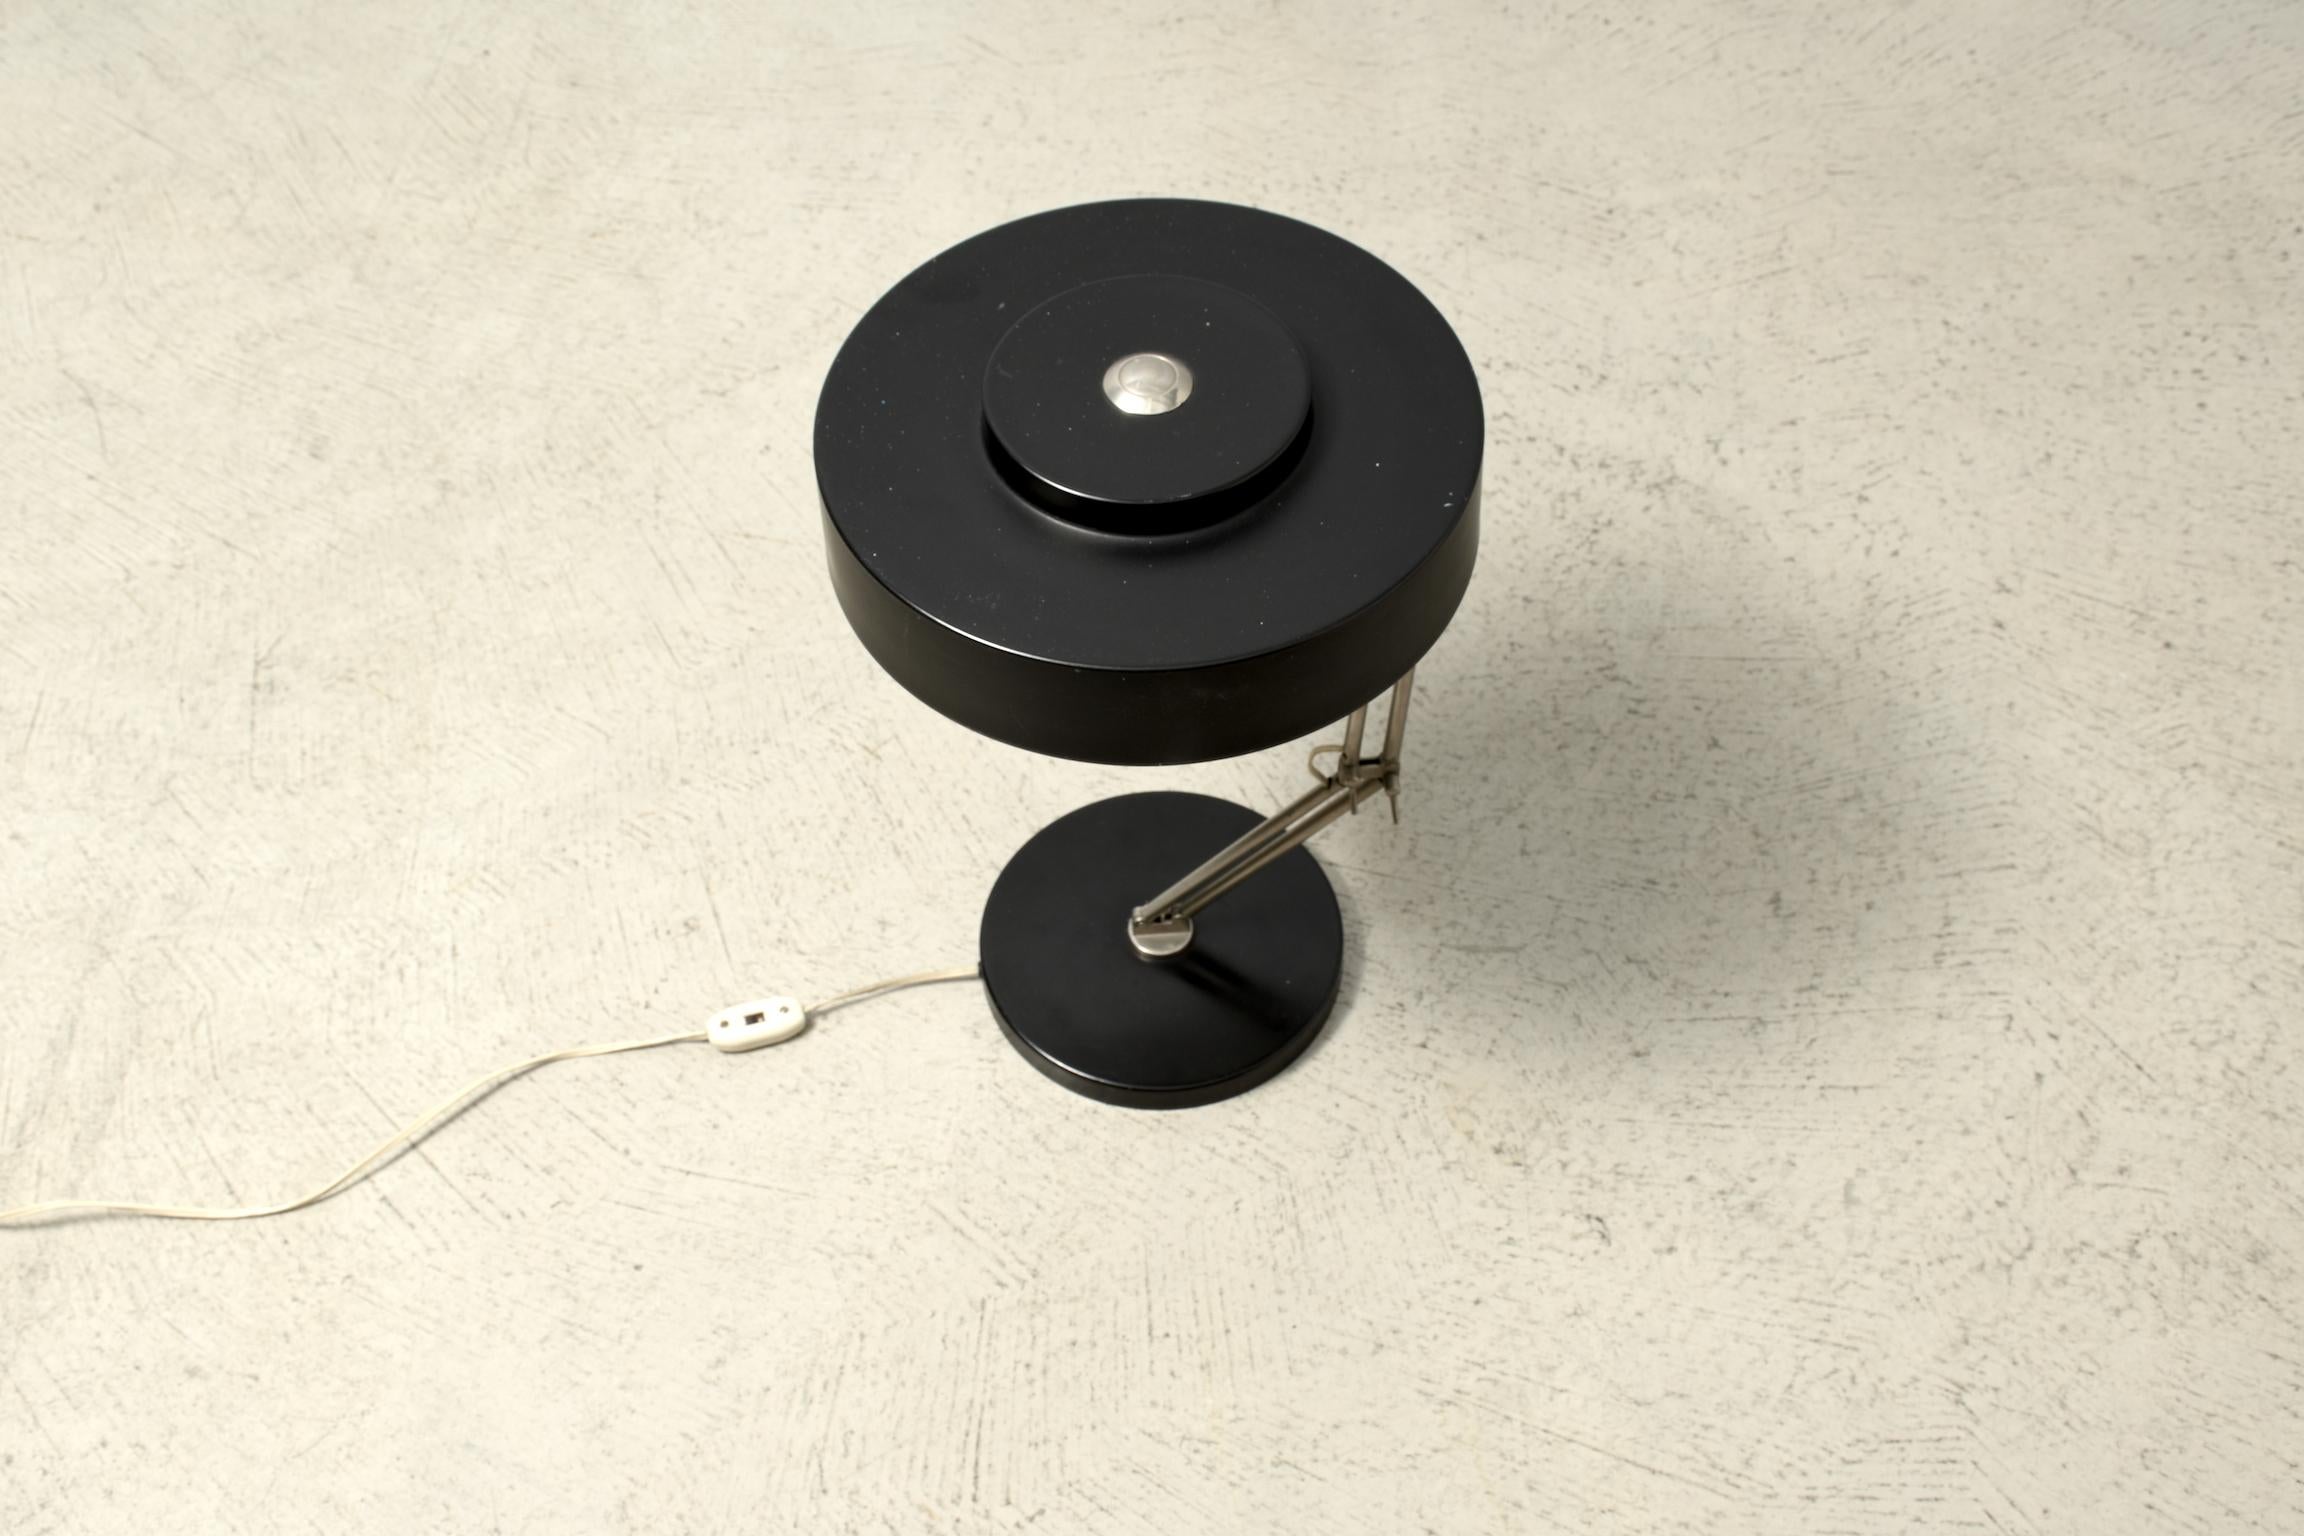 Table lamp, 1960s, with round shaped lamp shade in black painted sheet metal. Standing on a black sheet metal base. Two adjustable joint bars allow to move the lamp in different positions.